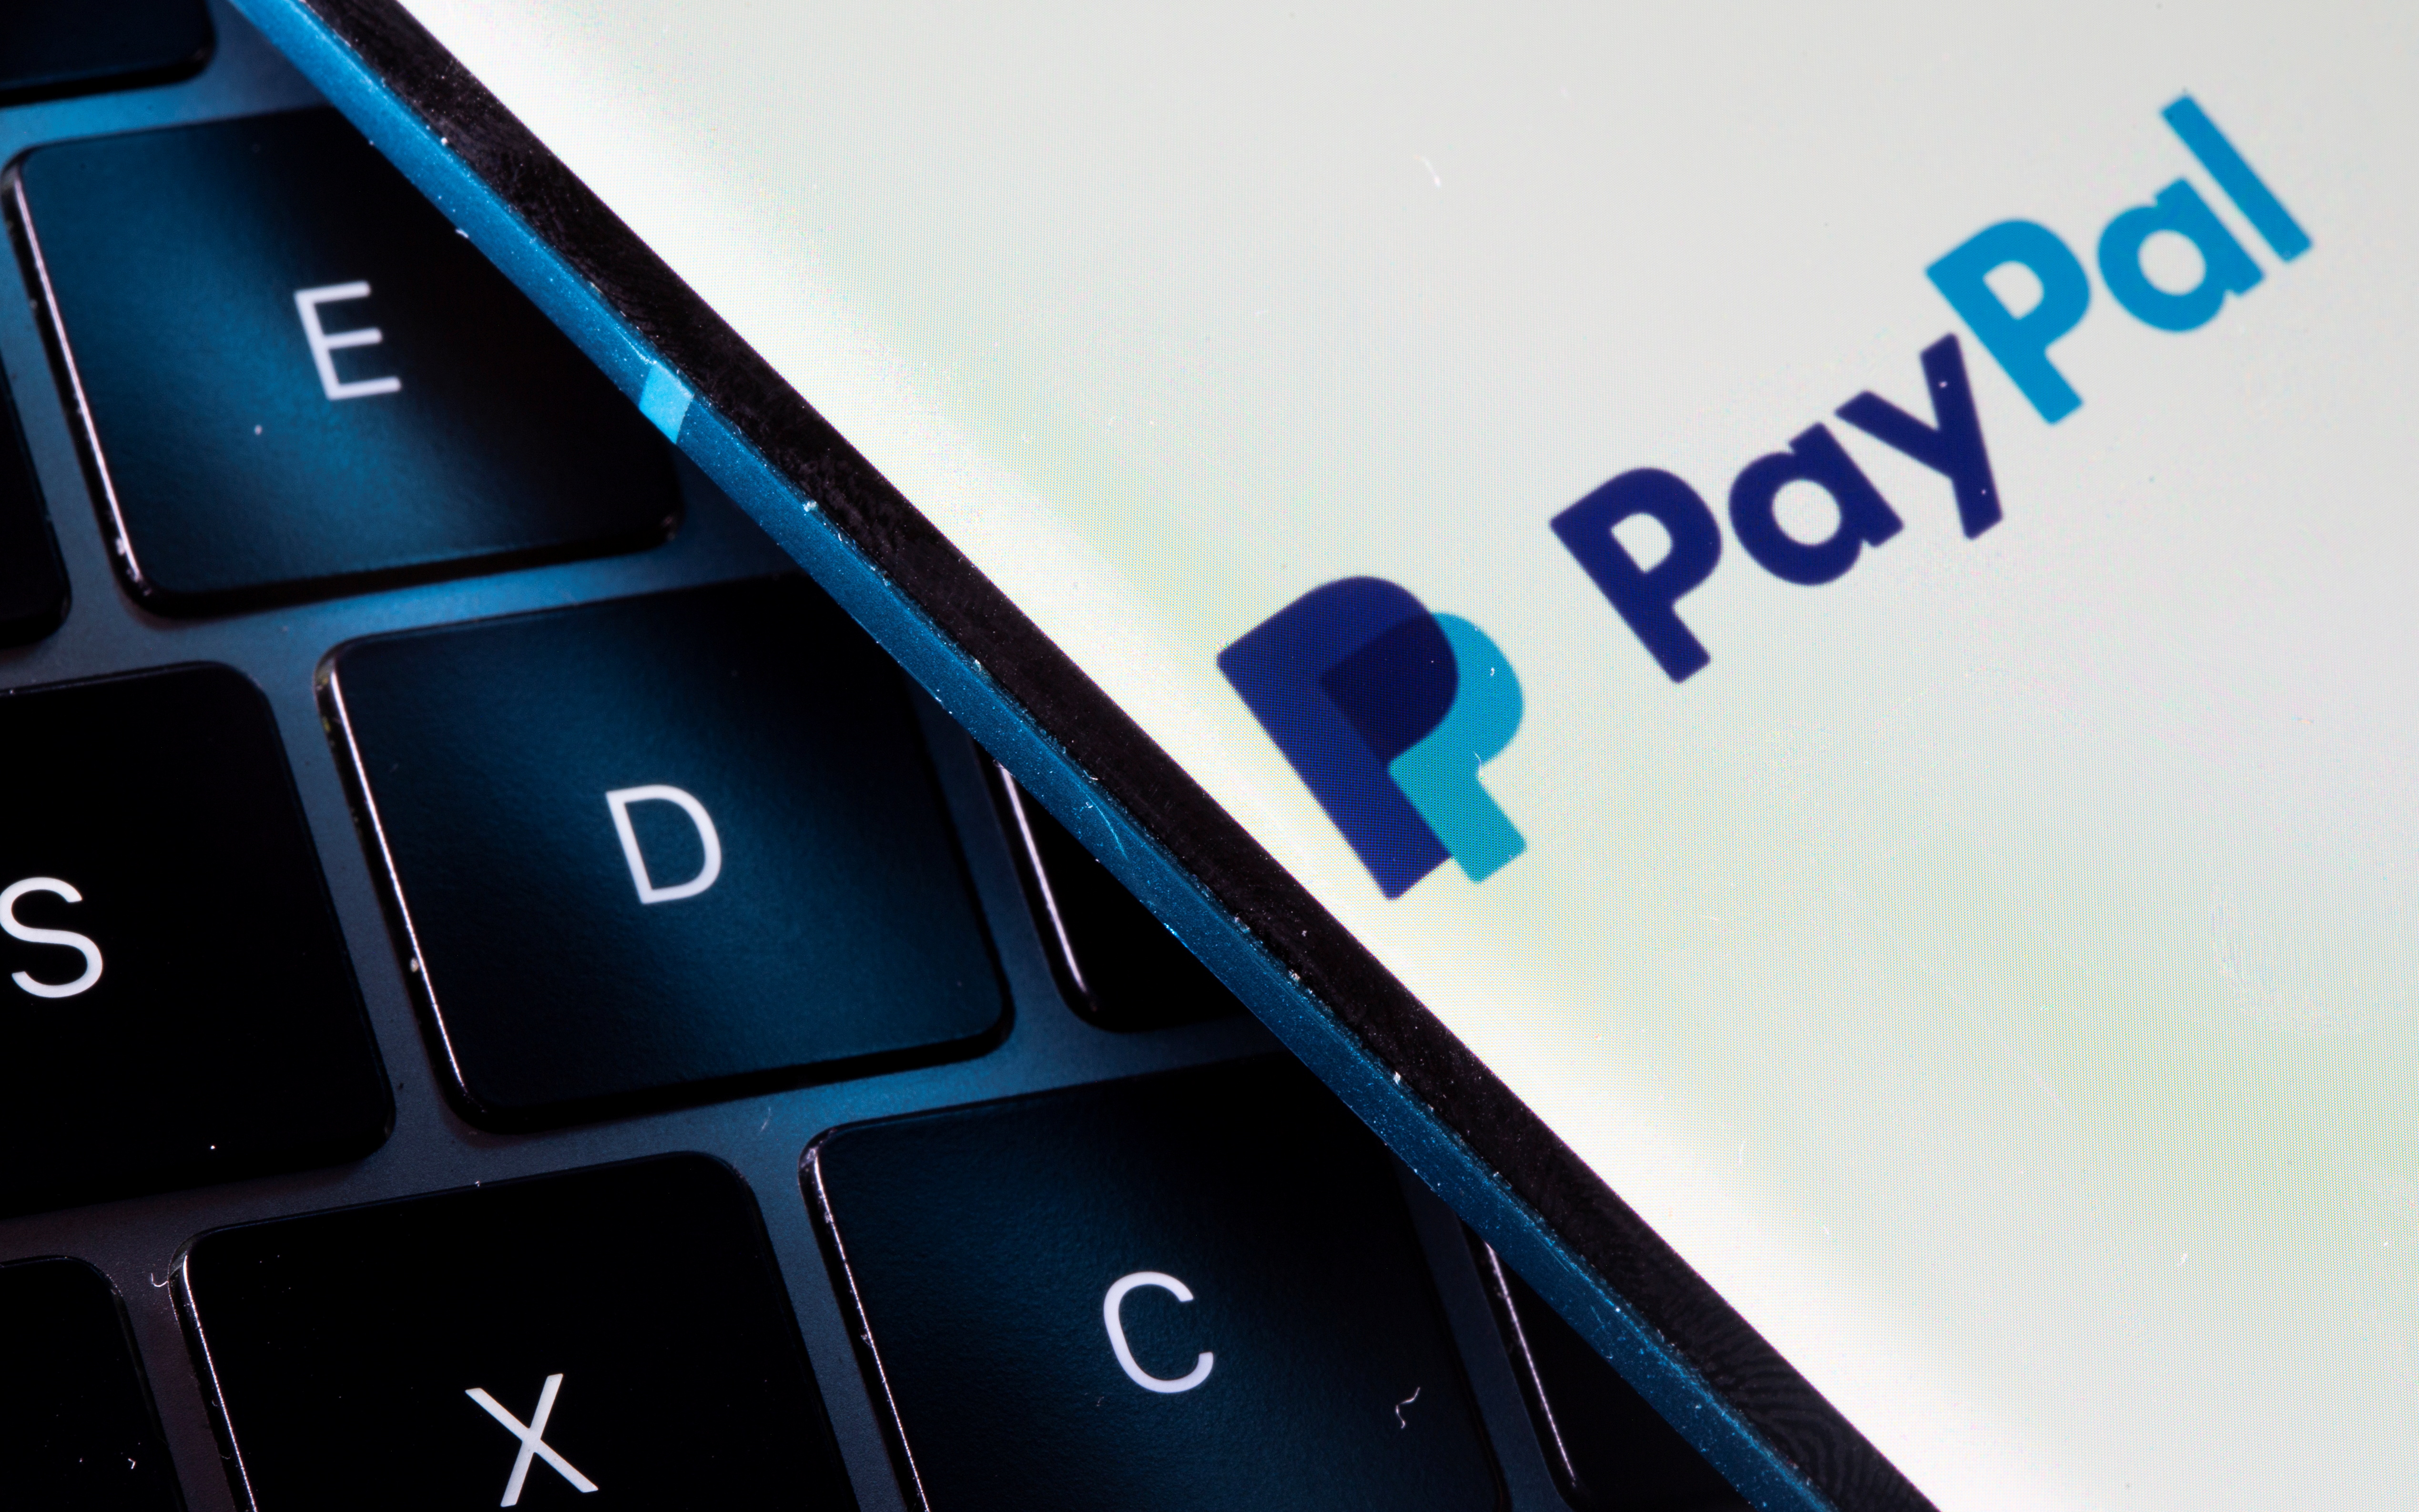 Legal Agreements for PayPal Services